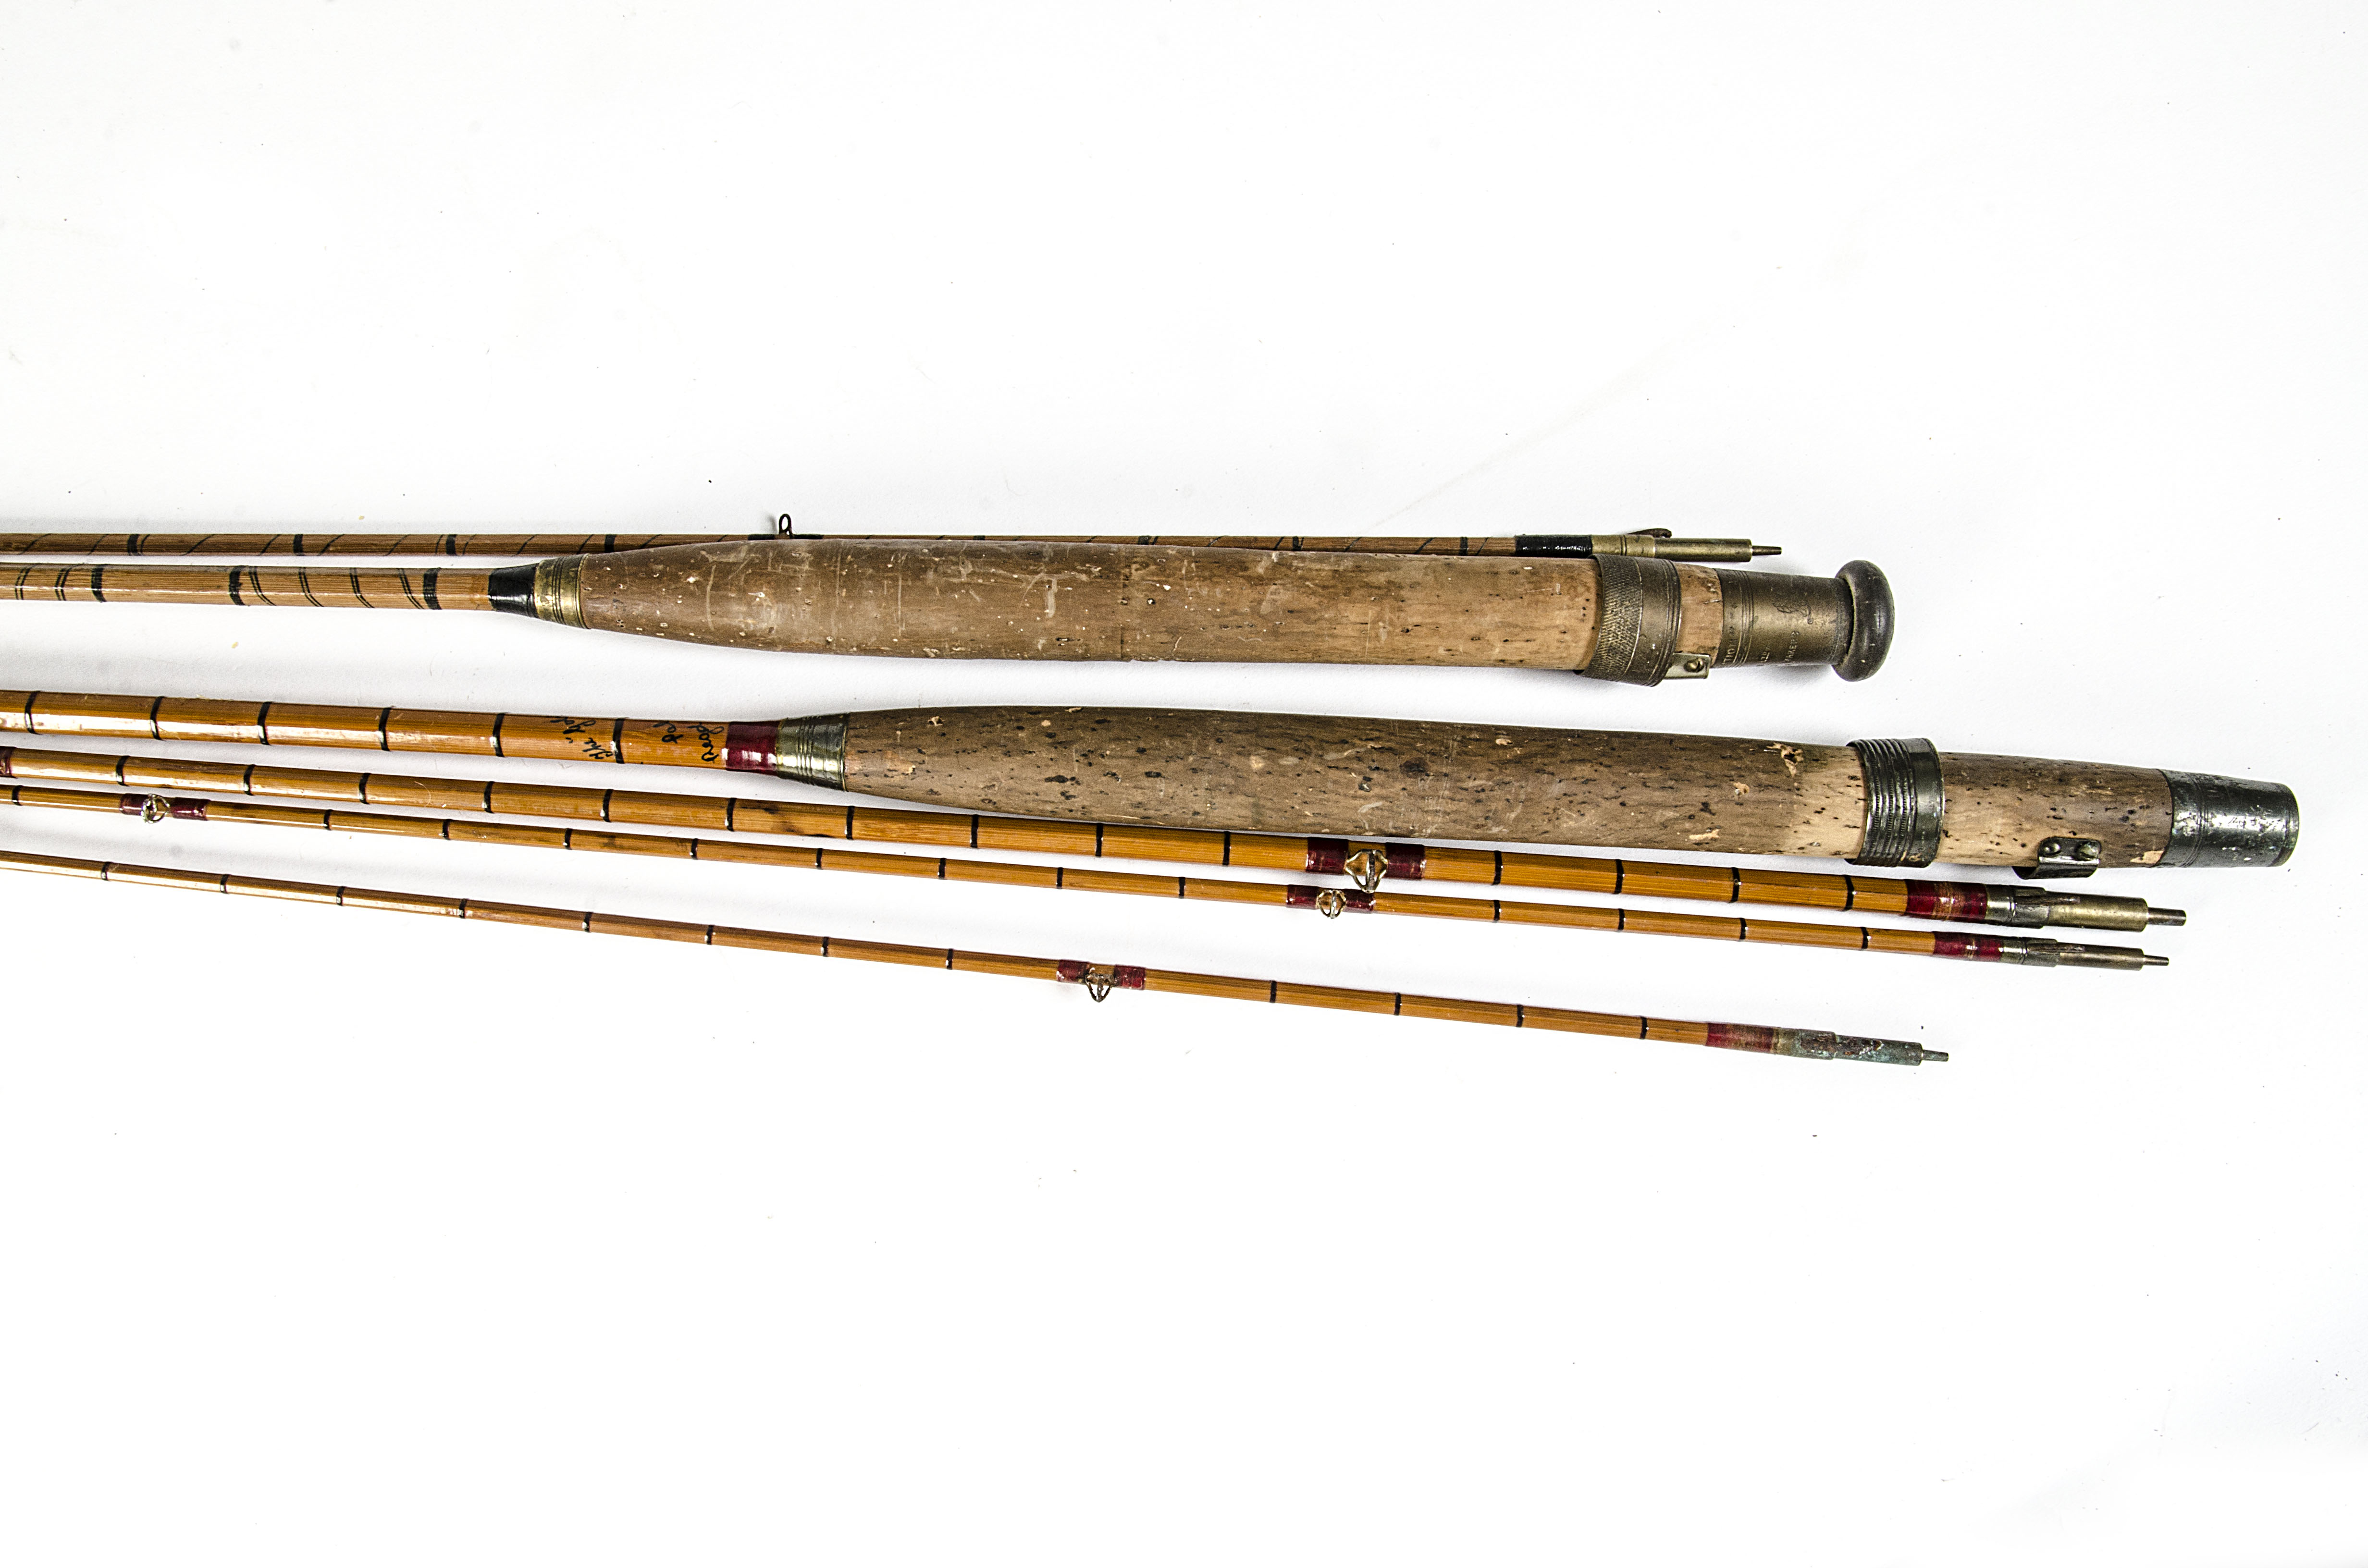 Angling Equipment, a Hardy's "The Gold Medal" Palakona hexagonal cane rod, 10ft, 4pcs including